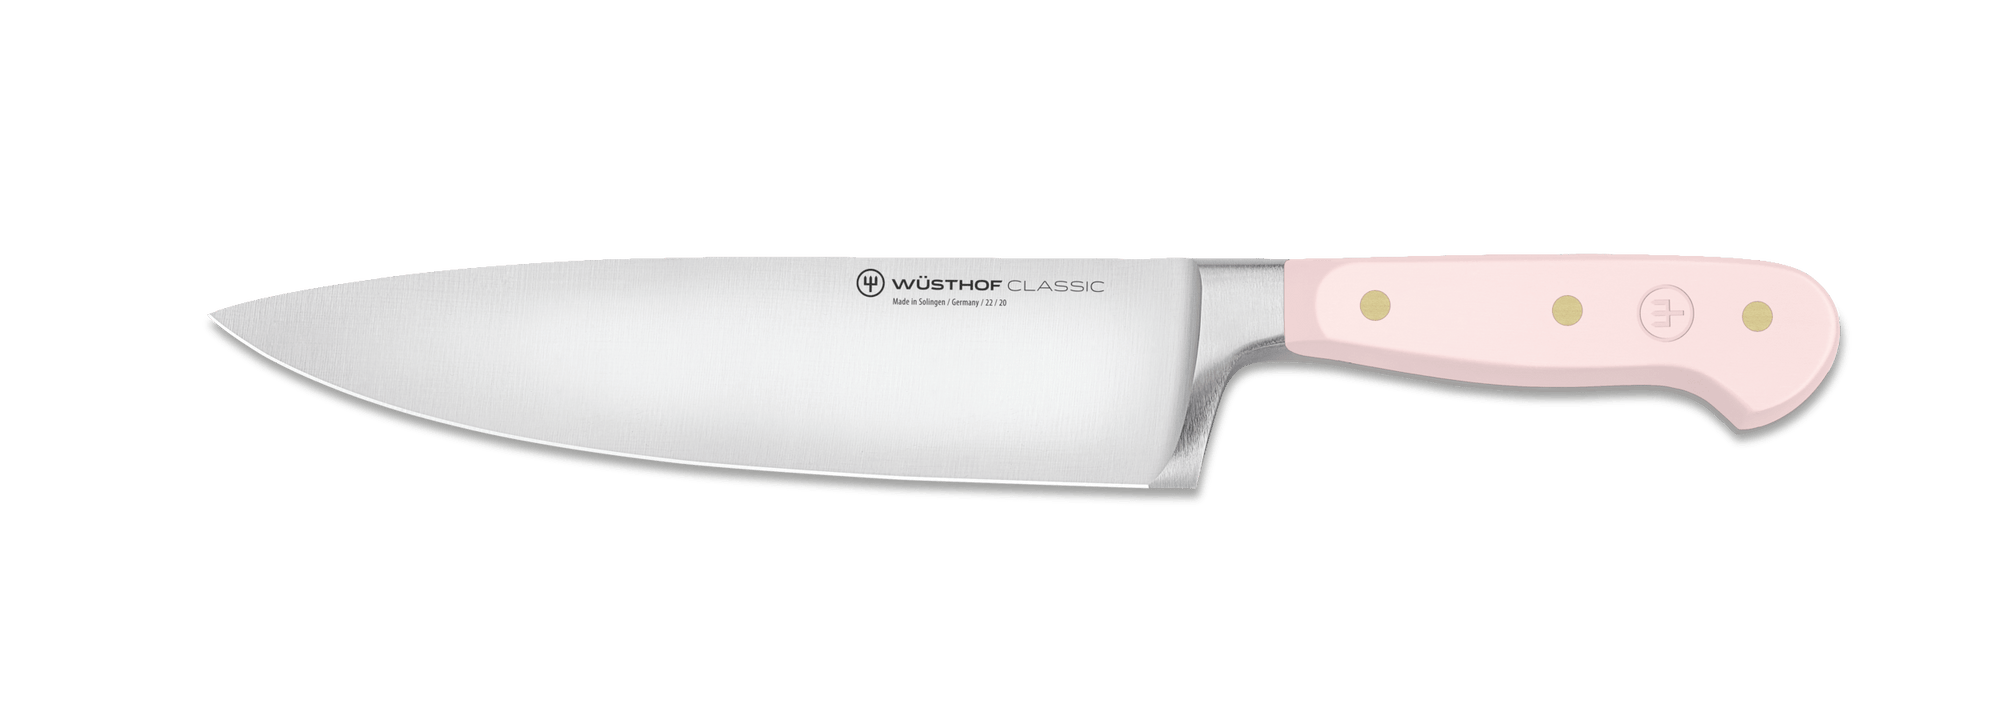 Wusthof Chef's Knives Wusthof Classic 8" Chef's Knife - Pink